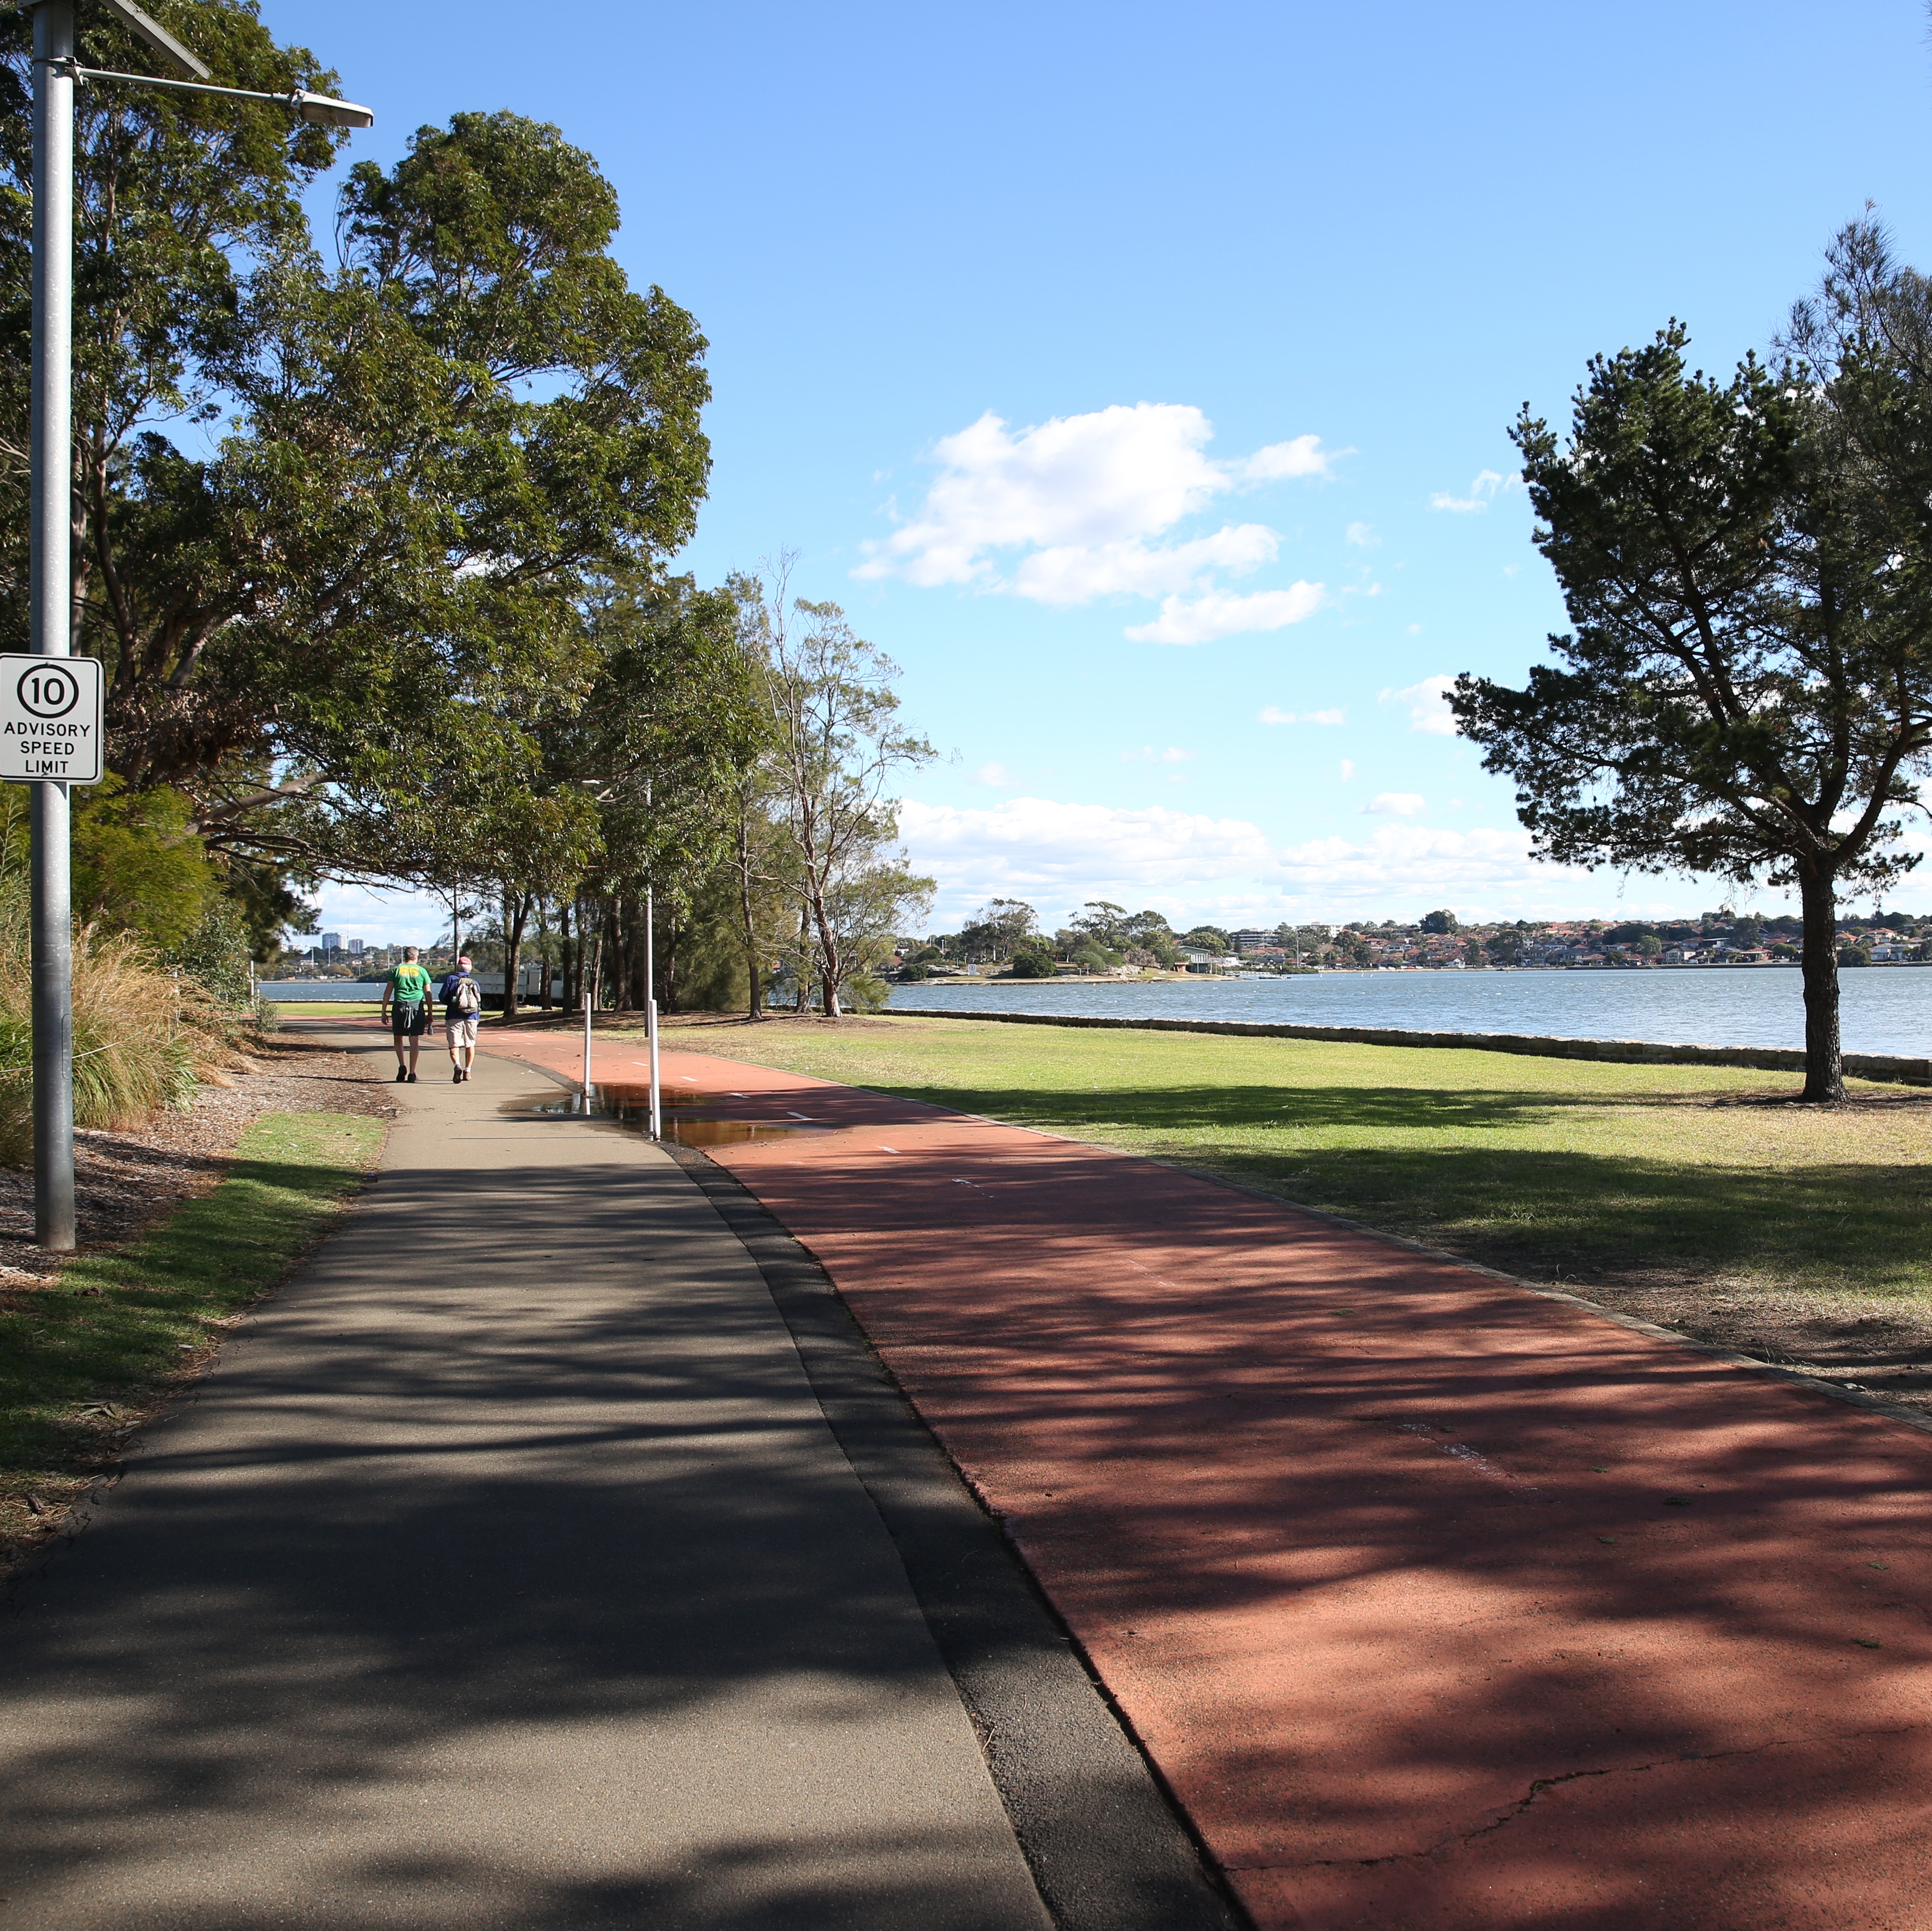  Leichhardt Park cycle track